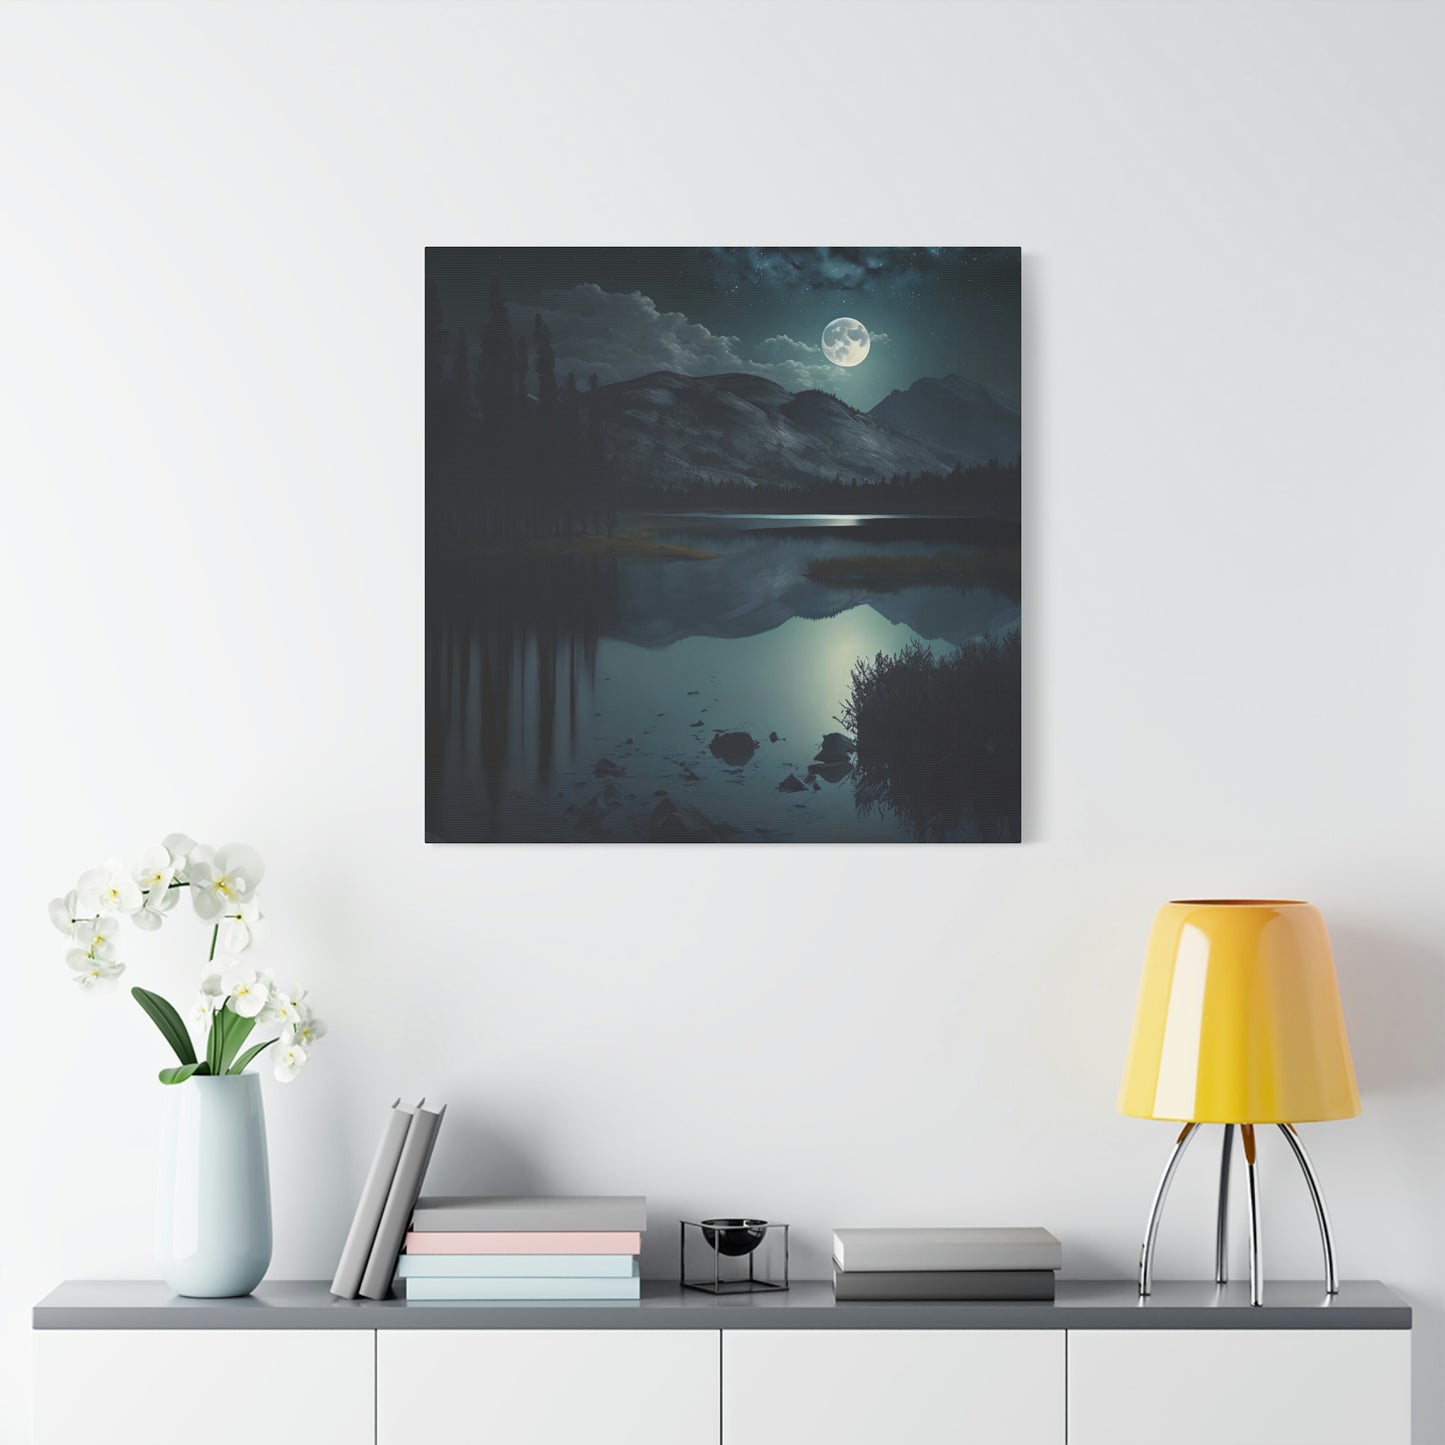 Mountain Lake at Night - Matte Canvas, Stretched, 1.25"